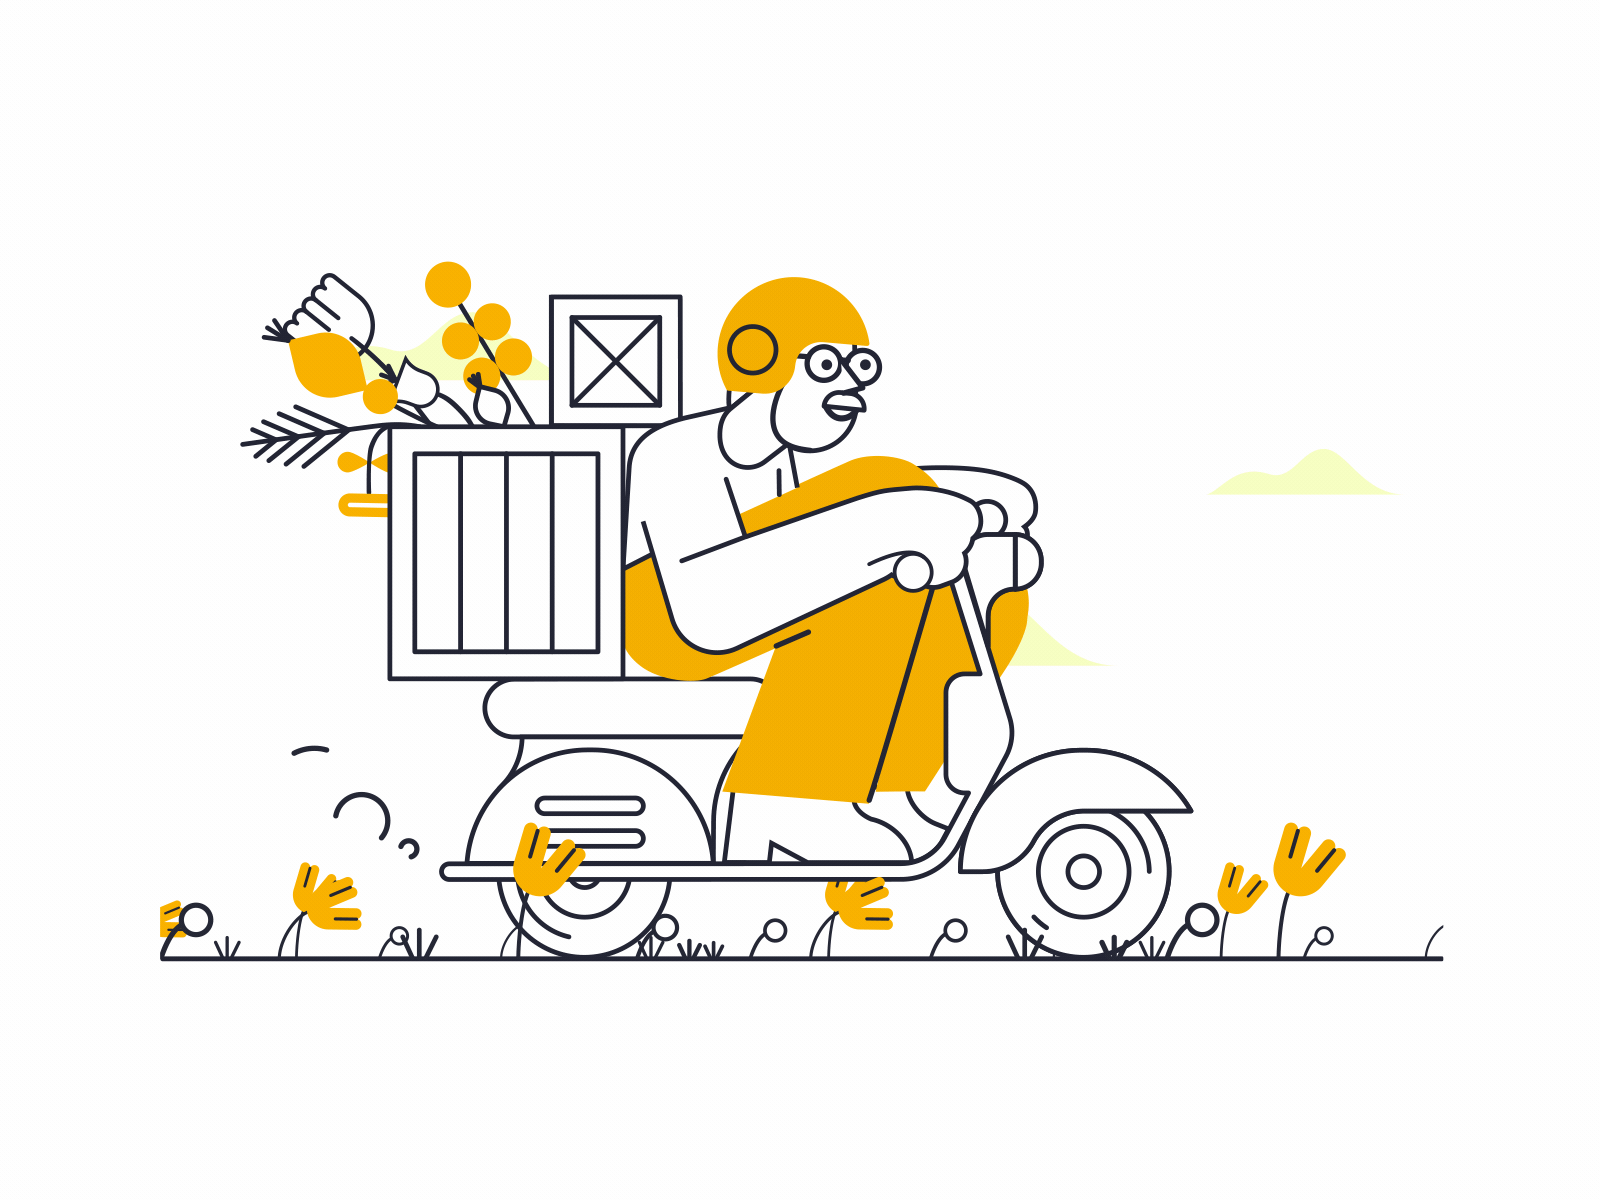 Delivery 2danimation animation animation 2d car car animation character animation character design flat design motorcycle